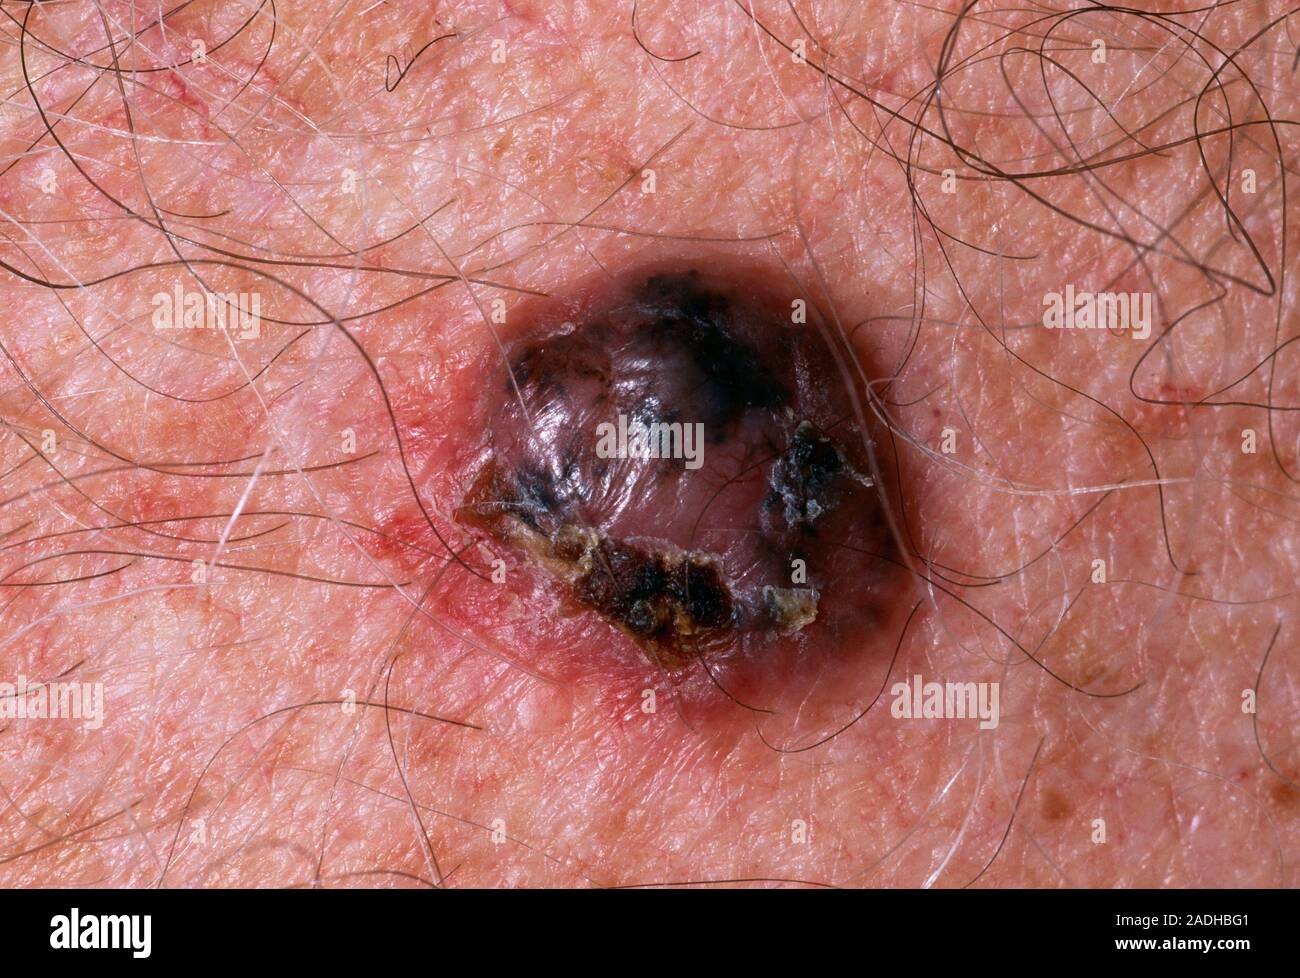 Skin Cancer Pigmented Basal Cell Carcinoma Bcc Or Rodent Ulcer On